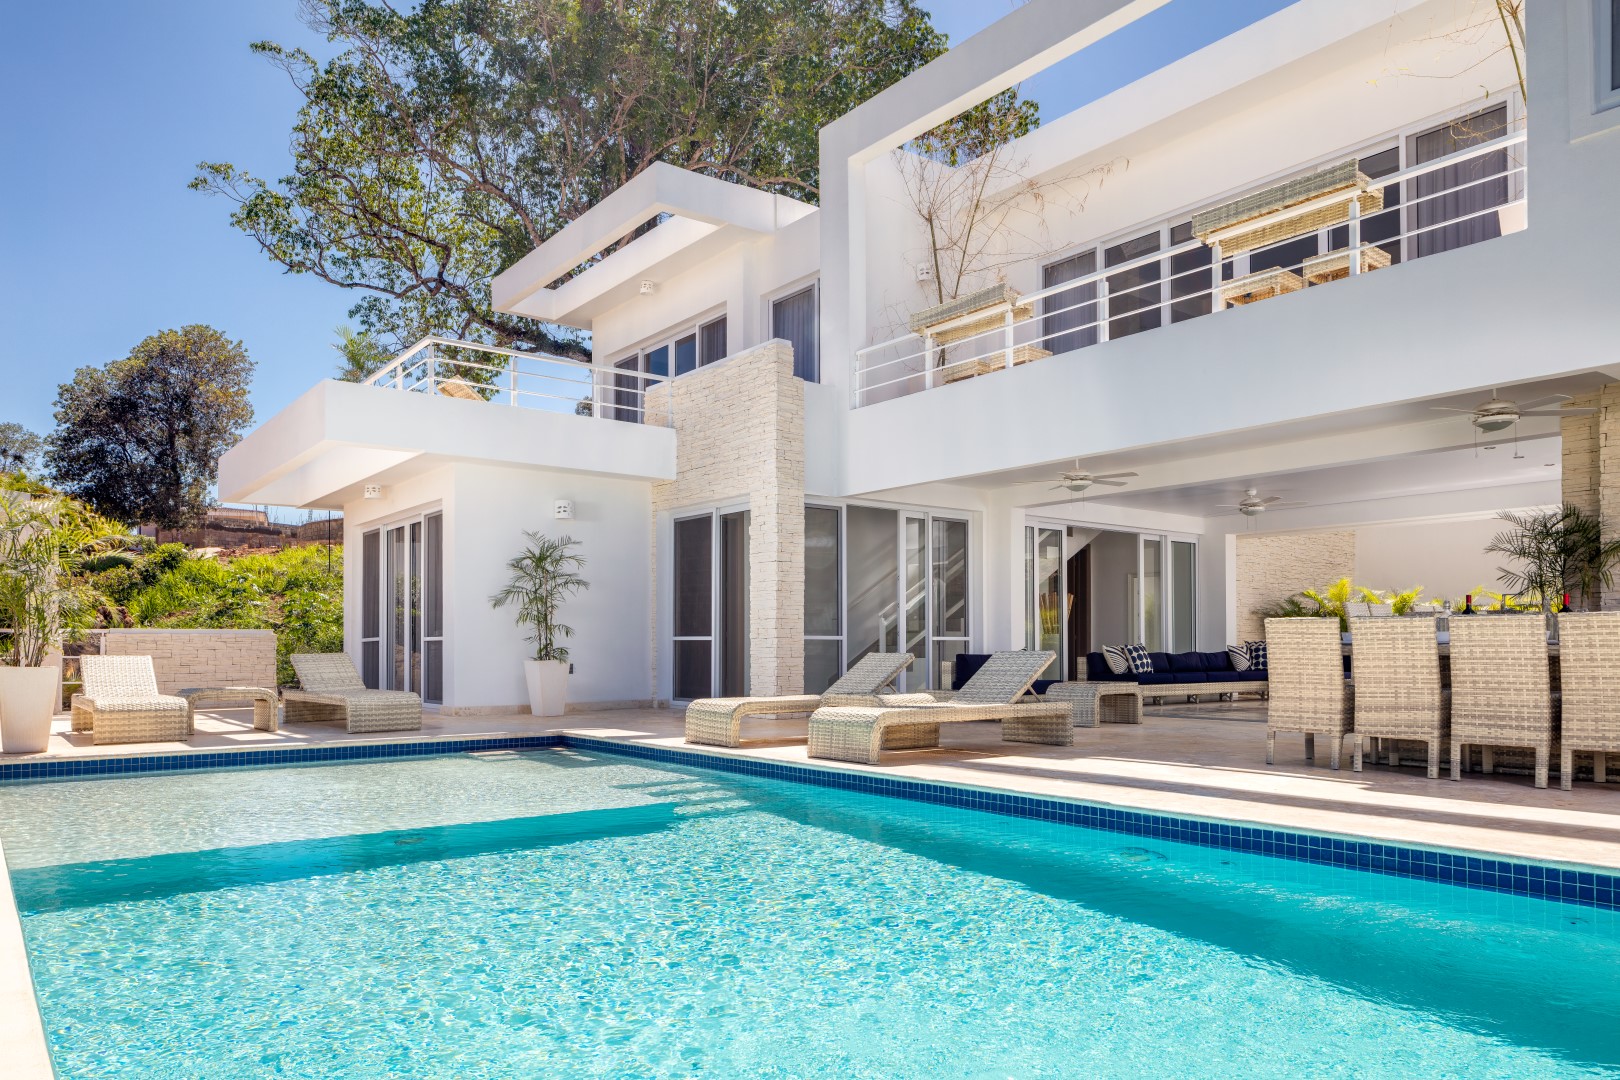 Why You Should Invest in a Luxury Villa in the Dominican Republic